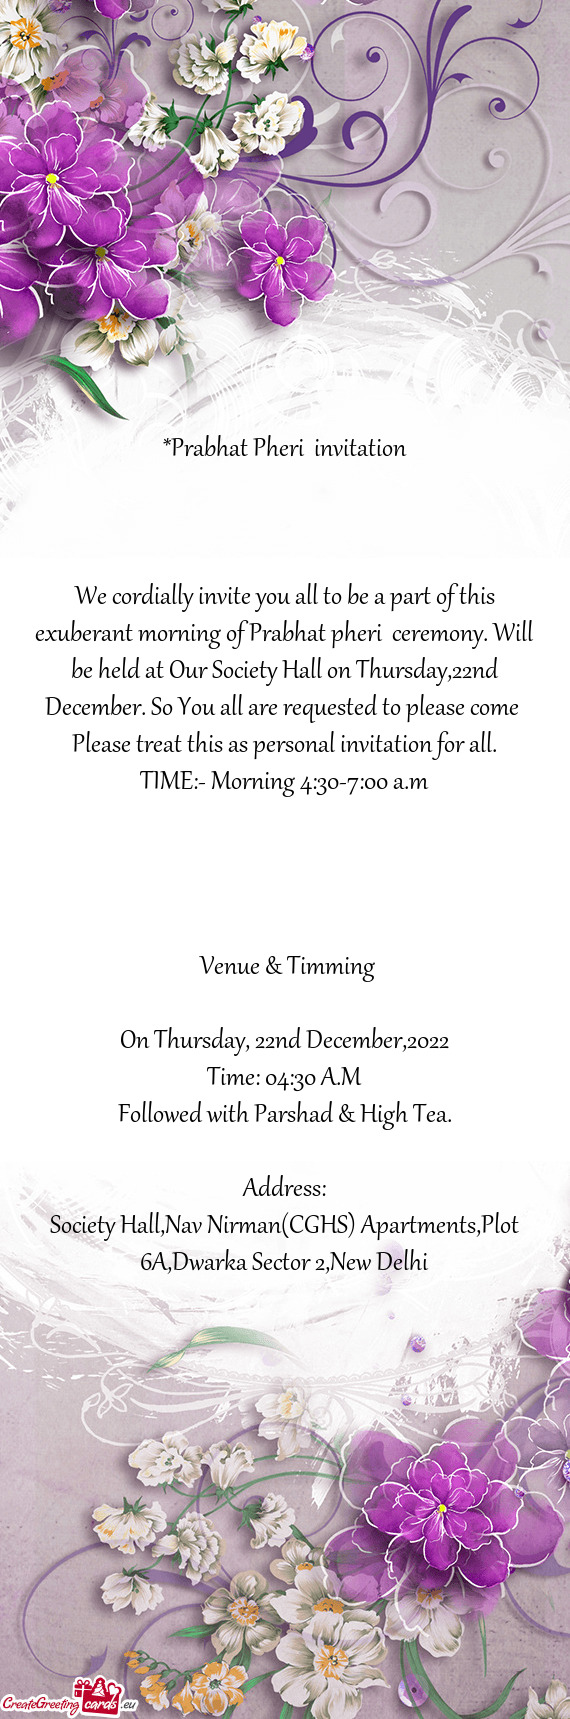 Be held at Our Society Hall on Thursday,22nd December. So You all are requested to please come